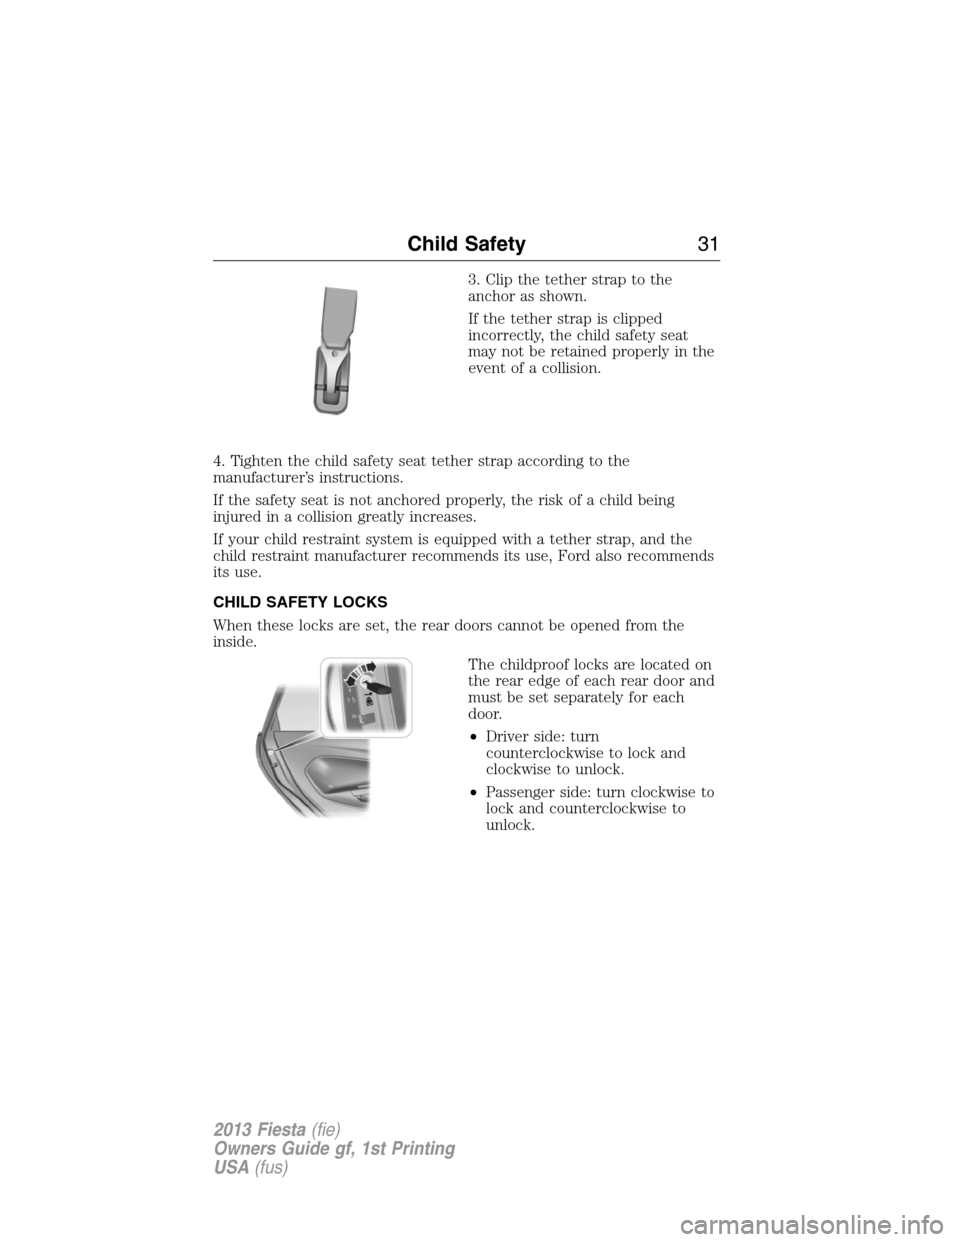 FORD FIESTA 2013 7.G Owners Manual 3. Clip the tether strap to the
anchor as shown.
If the tether strap is clipped
incorrectly, the child safety seat
may not be retained properly in the
event of a collision.
4. Tighten the child safety